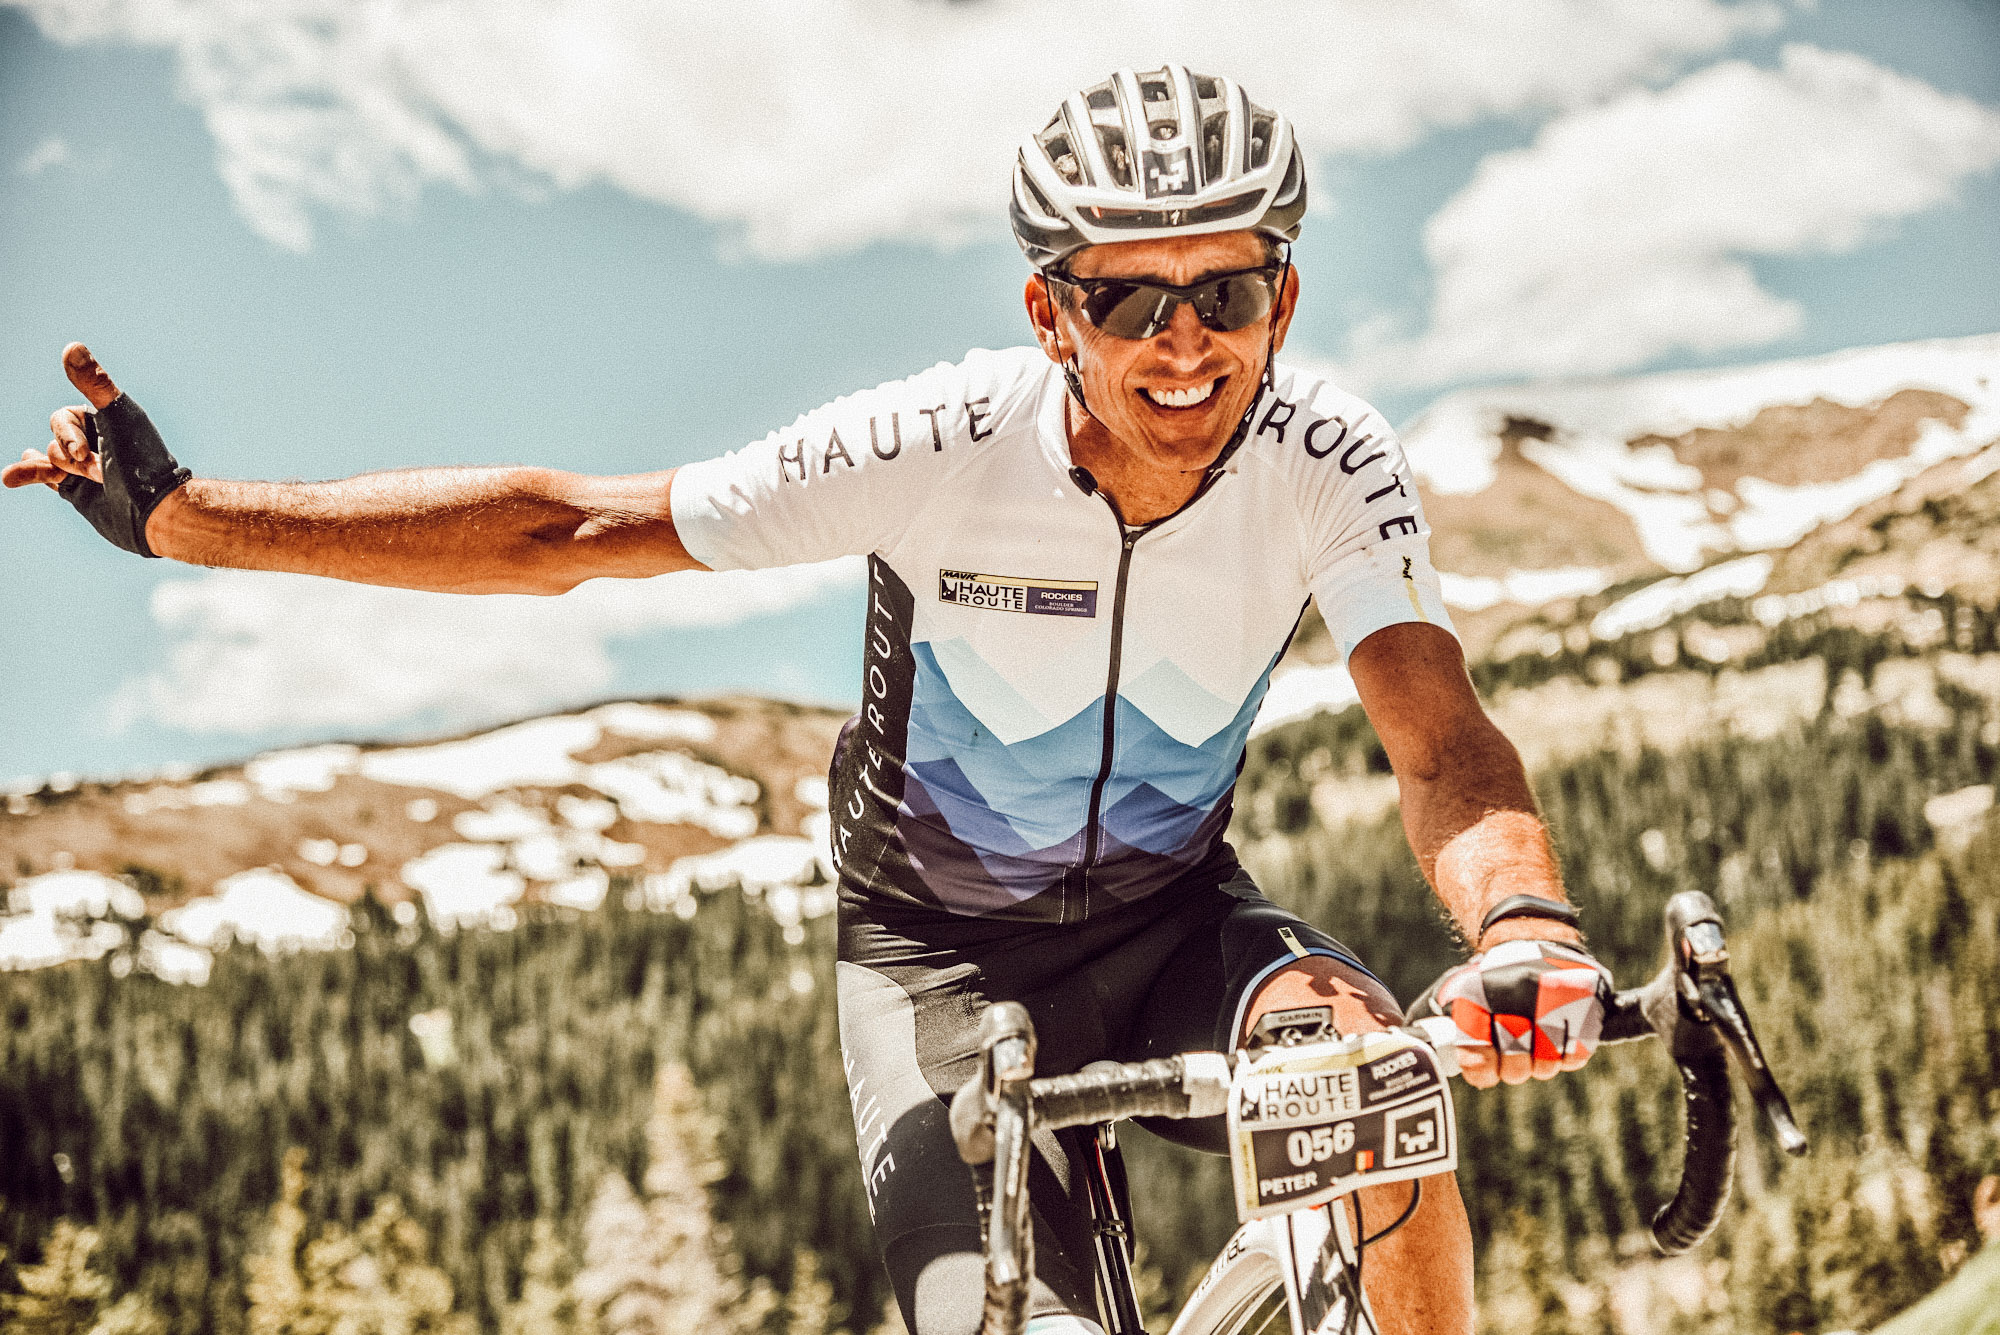 Haute Route Cycling Series Expands To 11 Events In 2018 with Three New